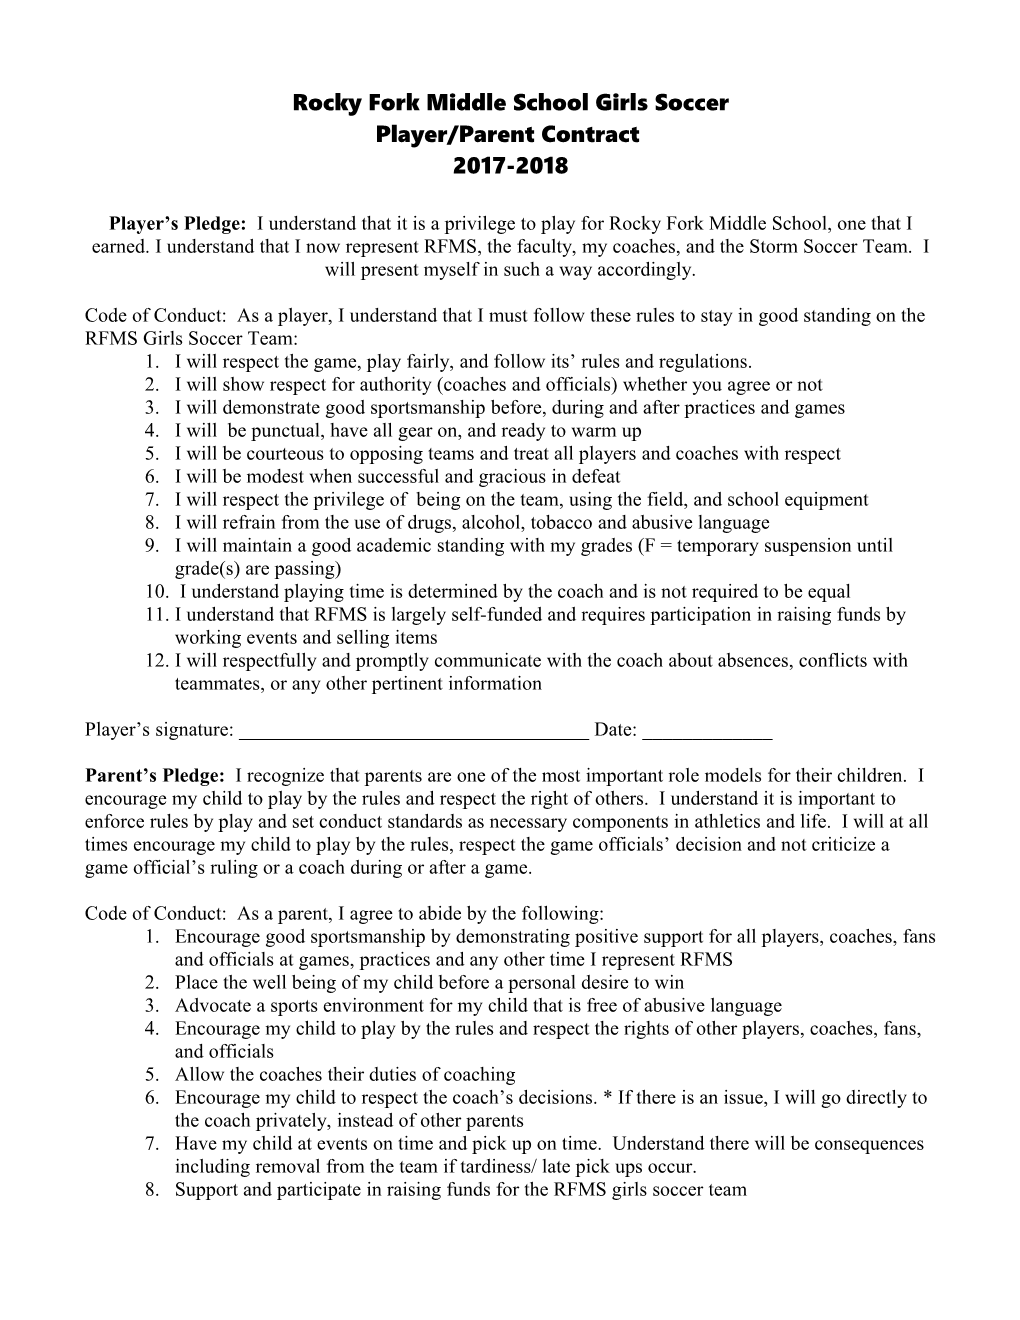 Player/Parent Contract